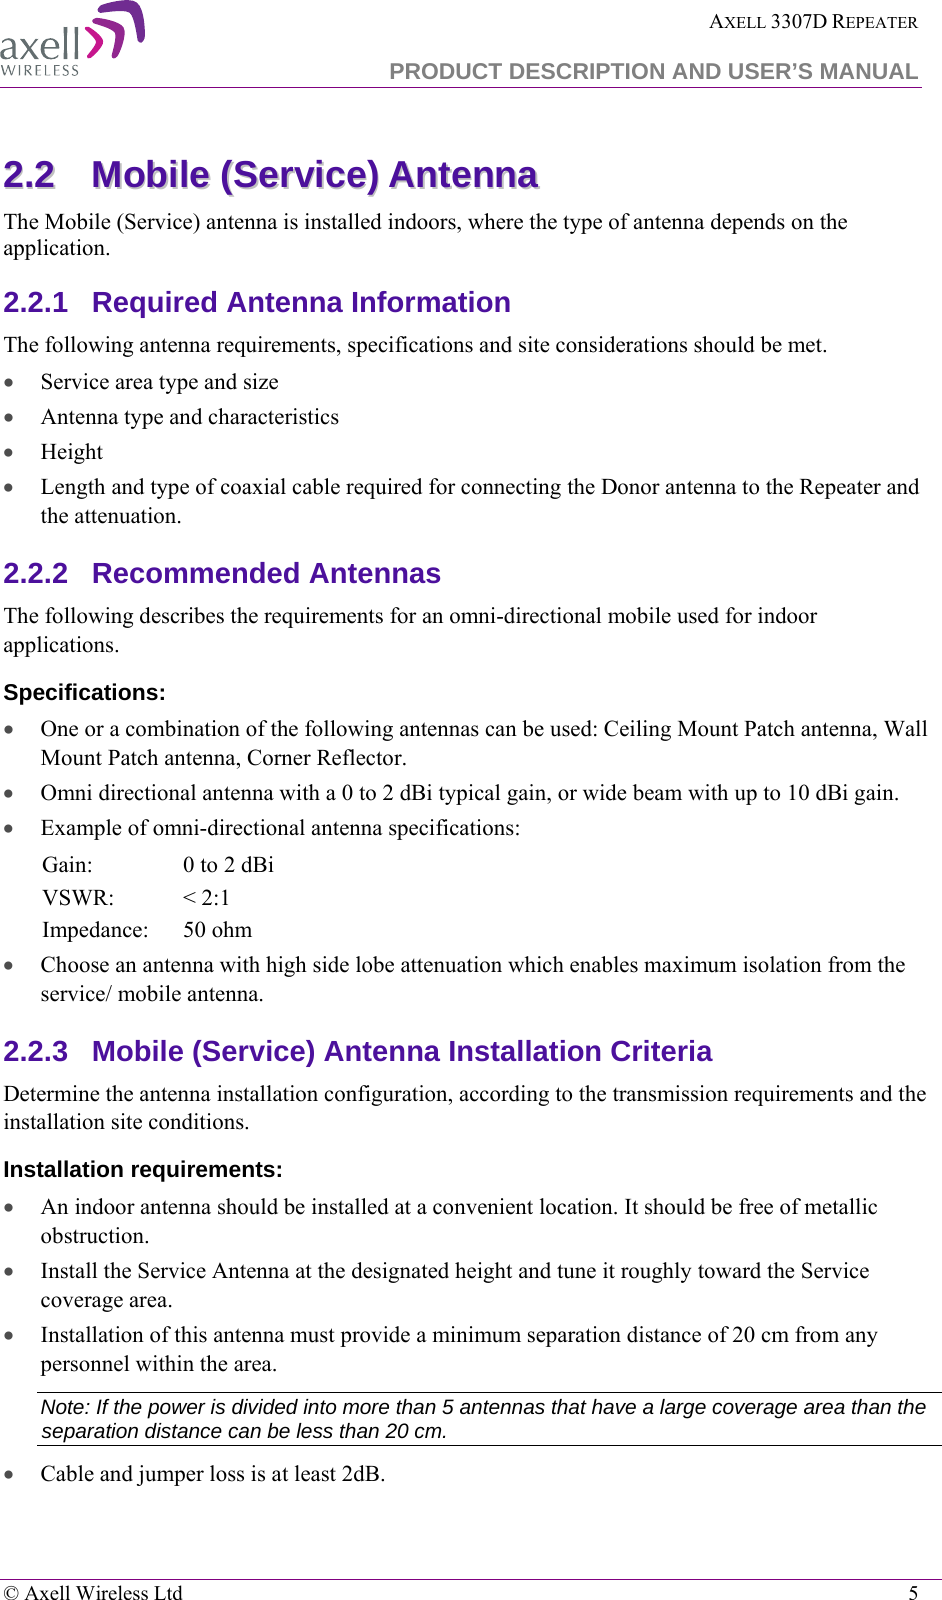  AXELL 3307D REPEATER  PRODUCT DESCRIPTION AND USER’S MANUAL   © Axell Wireless Ltd    5 22..22  MMoobbiillee  ((SSeerrvviiccee))  AAnntteennnnaa  The Mobile (Service) antenna is installed indoors, where the type of antenna depends on the application. 2.2.1  Required Antenna Information The following antenna requirements, specifications and site considerations should be met. • Service area type and size  • Antenna type and characteristics • Height • Length and type of coaxial cable required for connecting the Donor antenna to the Repeater and the attenuation. 2.2.2  Recommended Antennas  The following describes the requirements for an omni-directional mobile used for indoor applications. Specifications: • One or a combination of the following antennas can be used: Ceiling Mount Patch antenna, Wall Mount Patch antenna, Corner Reflector. • Omni directional antenna with a 0 to 2 dBi typical gain, or wide beam with up to 10 dBi gain. • Example of omni-directional antenna specifications:  Gain: 0 to 2 dBi VSWR: &lt; 2:1 Impedance: 50 ohm • Choose an antenna with high side lobe attenuation which enables maximum isolation from the service/ mobile antenna. 2.2.3  Mobile (Service) Antenna Installation Criteria Determine the antenna installation configuration, according to the transmission requirements and the installation site conditions. Installation requirements: • An indoor antenna should be installed at a convenient location. It should be free of metallic obstruction. • Install the Service Antenna at the designated height and tune it roughly toward the Service coverage area. • Installation of this antenna must provide a minimum separation distance of 20 cm from any personnel within the area. Note: If the power is divided into more than 5 antennas that have a large coverage area than the separation distance can be less than 20 cm. • Cable and jumper loss is at least 2dB. 